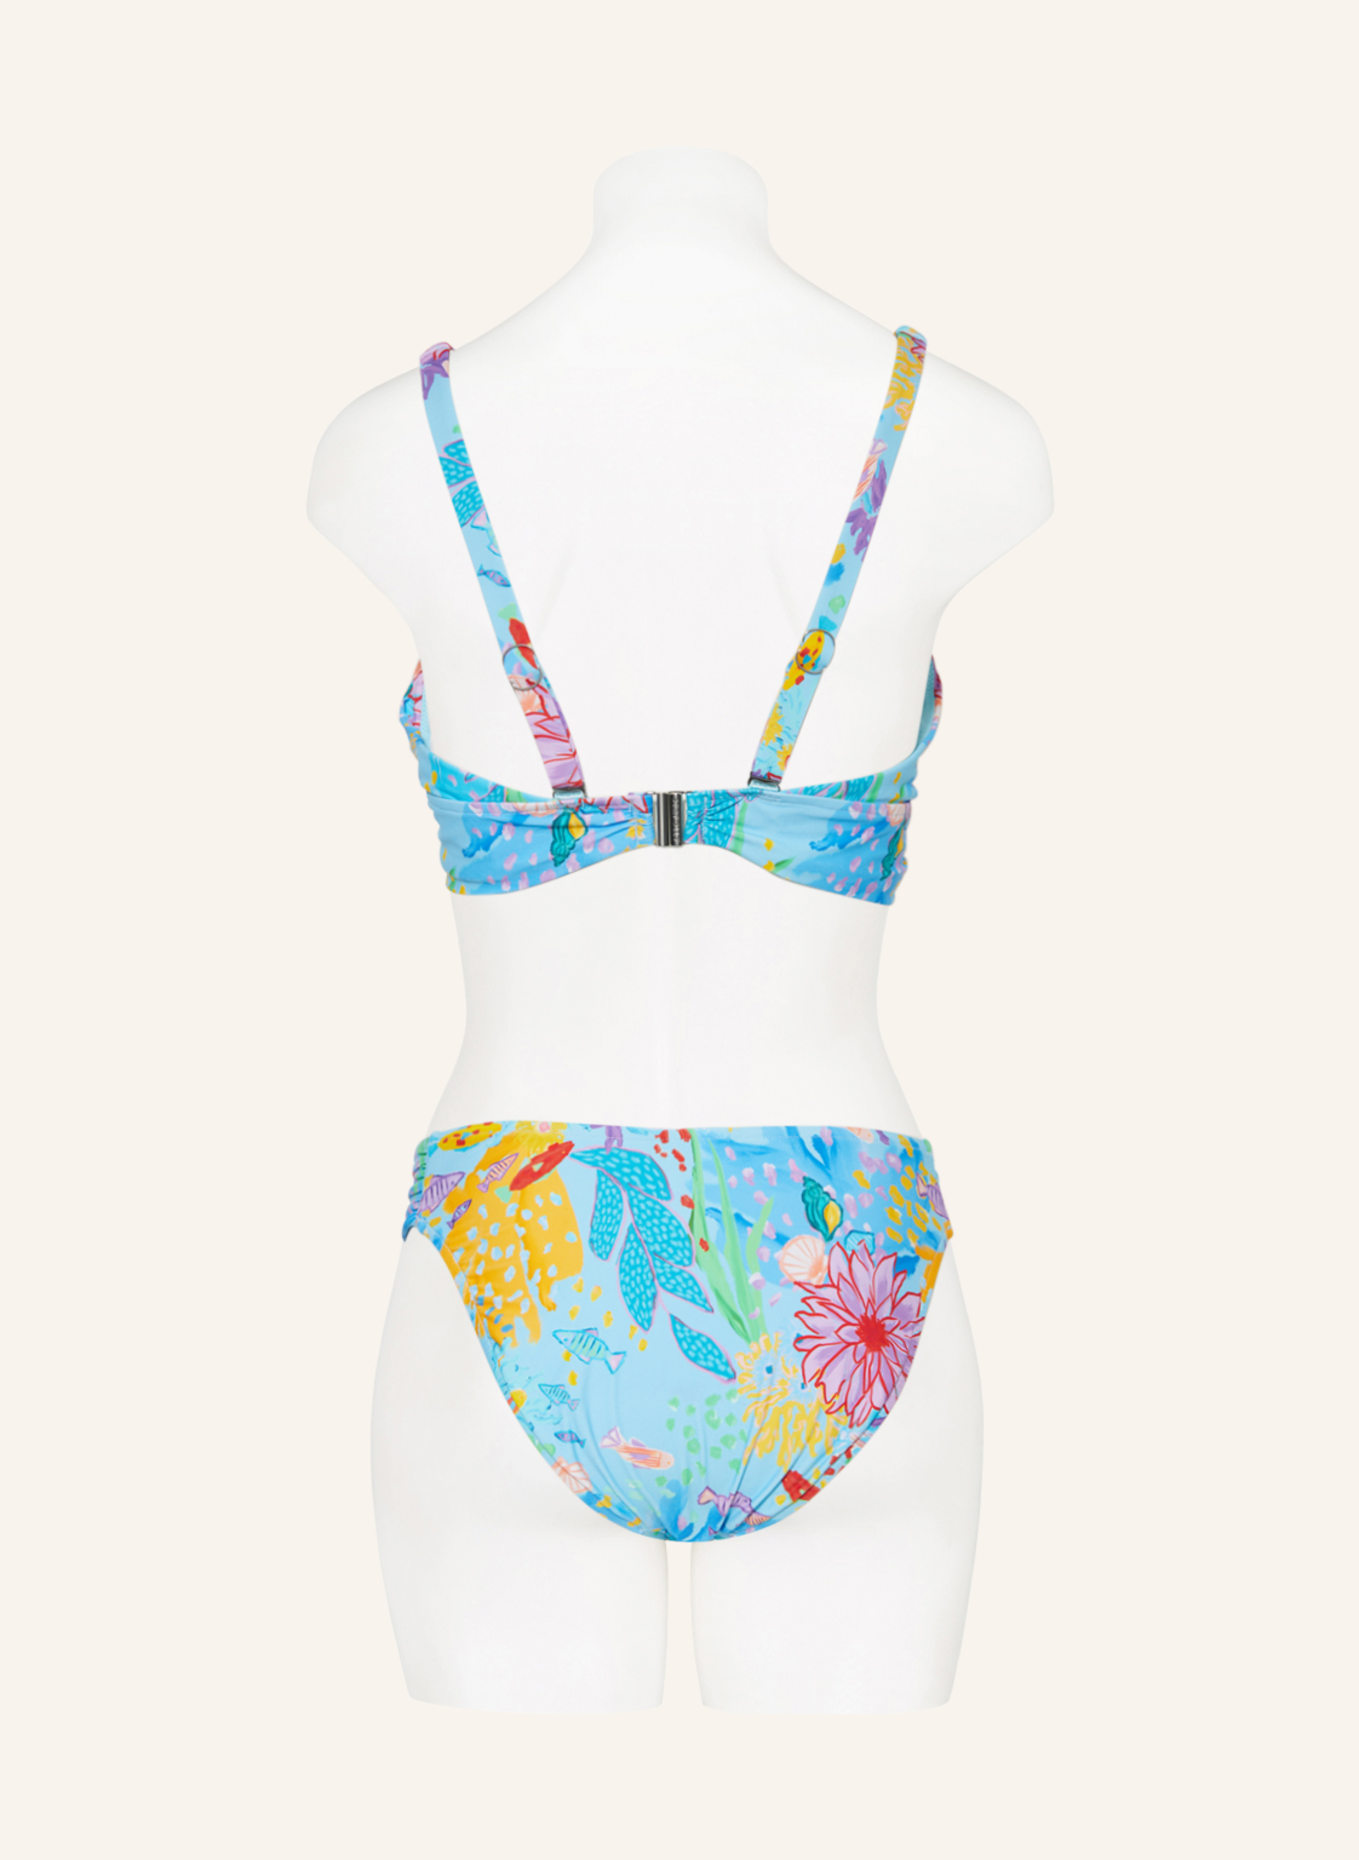 SEAFOLLY Bralette bikini top UNDER THE SEA, Color: LIGHT BLUE/ TURQUOISE/ YELLOW (Image 3)